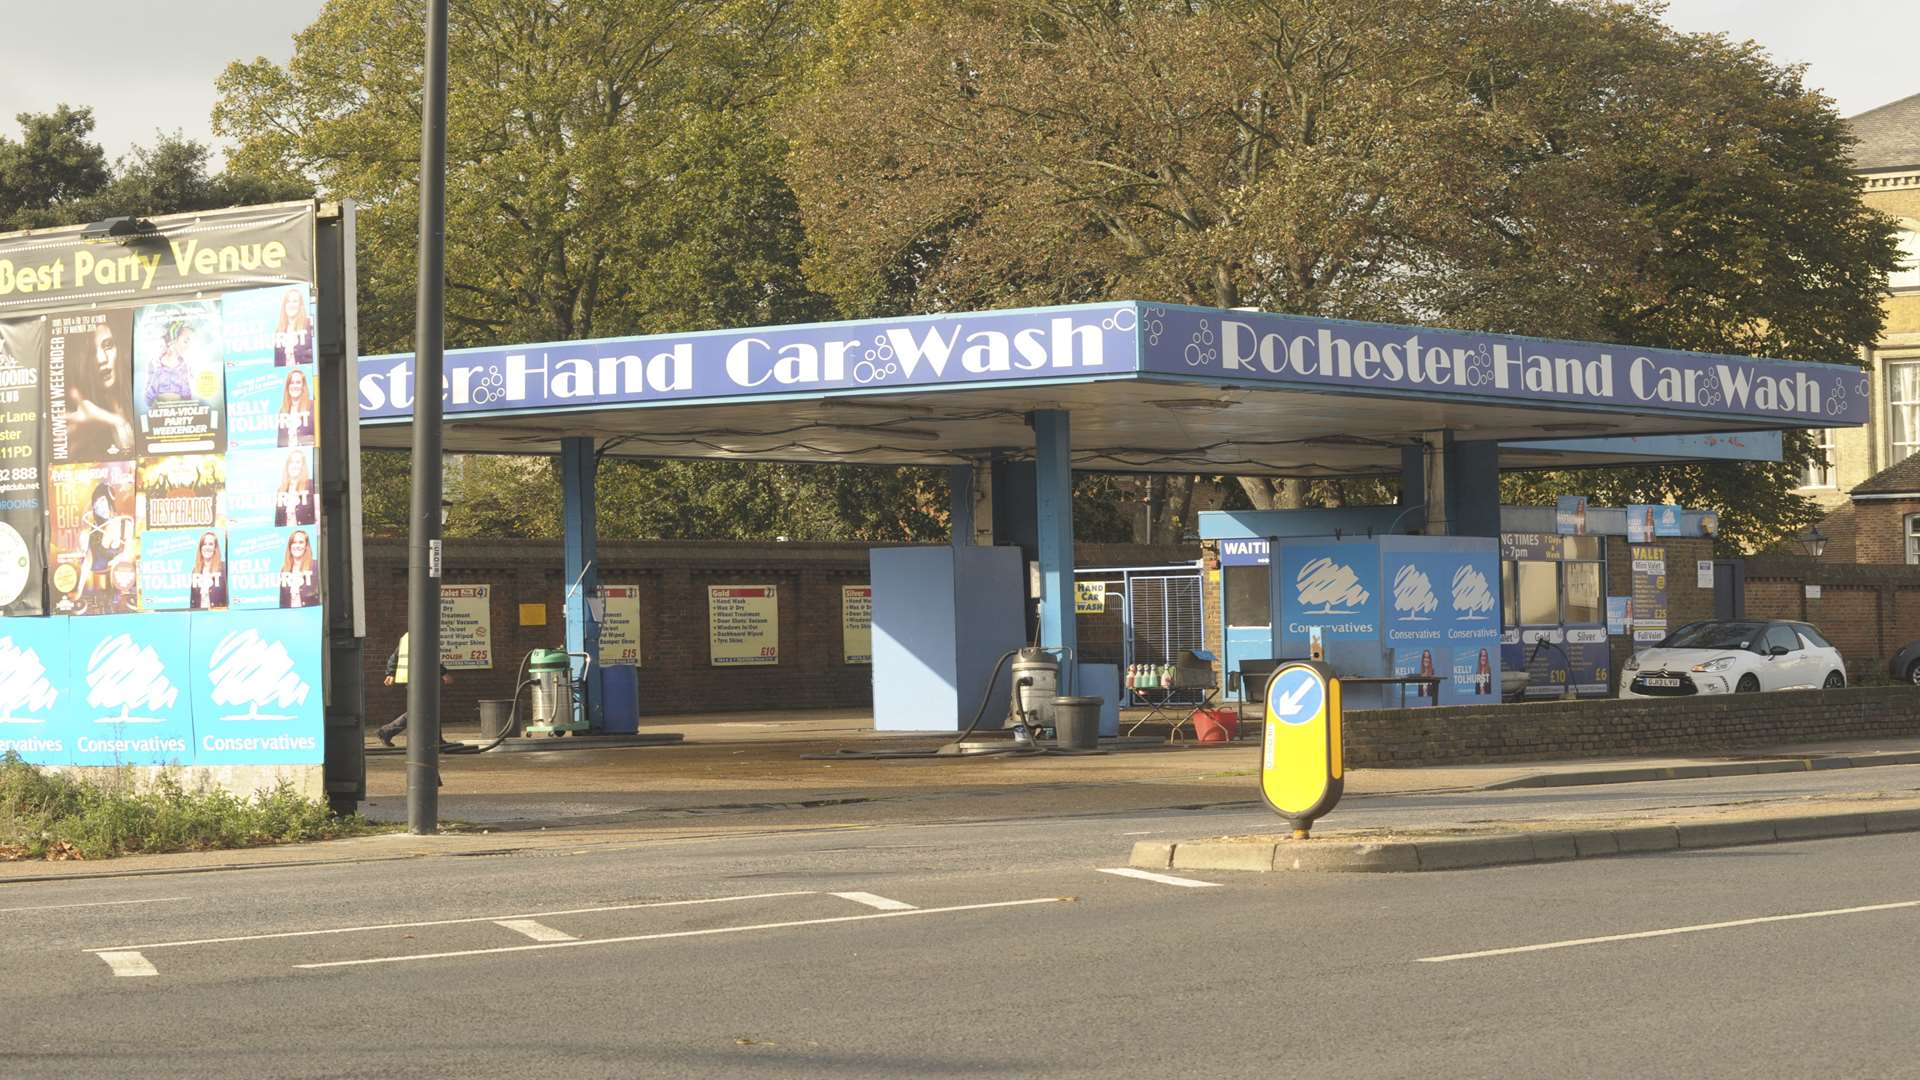 The car wash in Corporation Street, Rochester